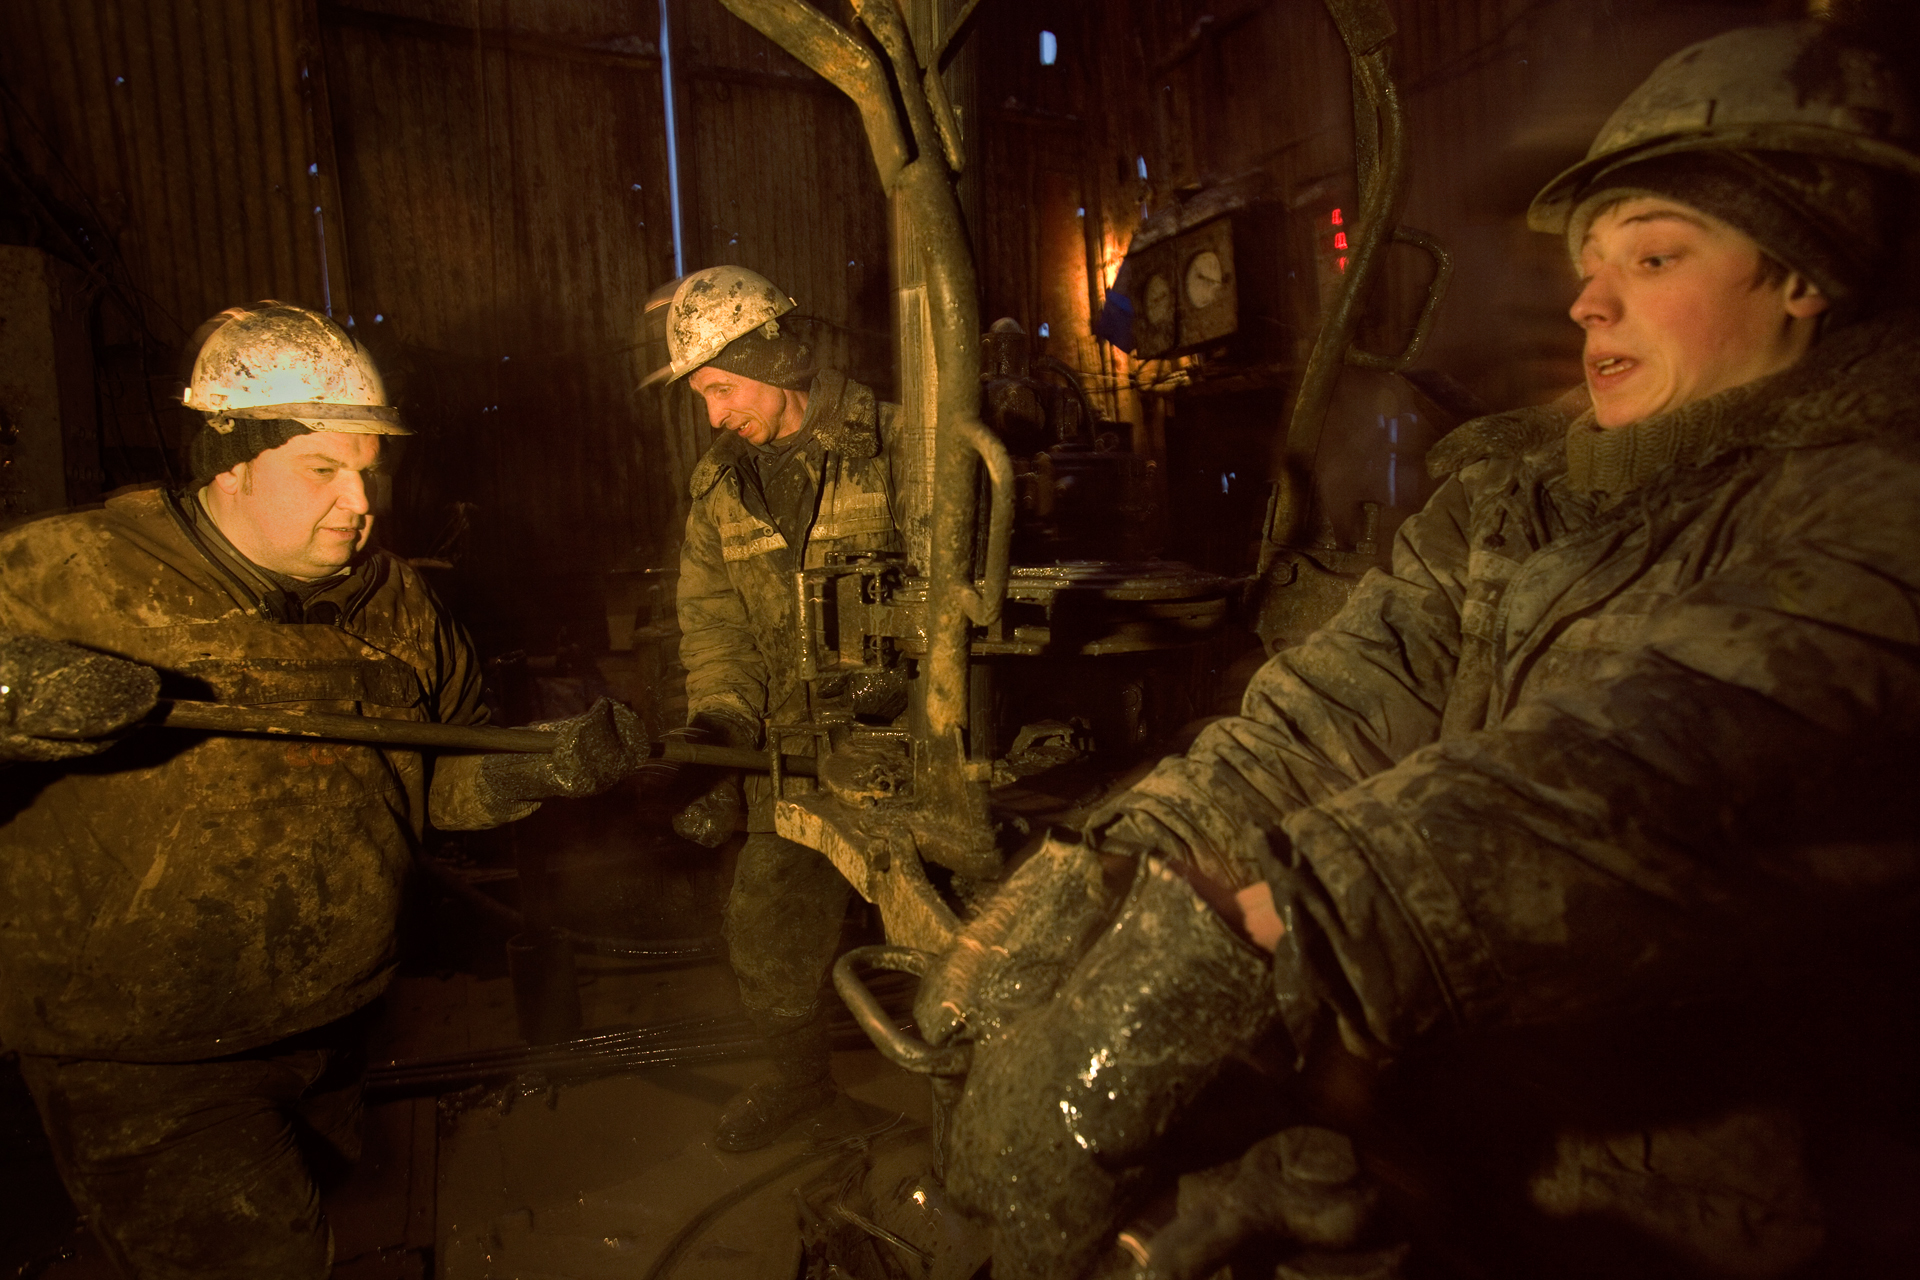  Workers on an oil rig for Surgutneftegas. The oil and gas company giant was among the first to start intensive exploration in Siberia.  Fyodorovsky oil field, Russia  